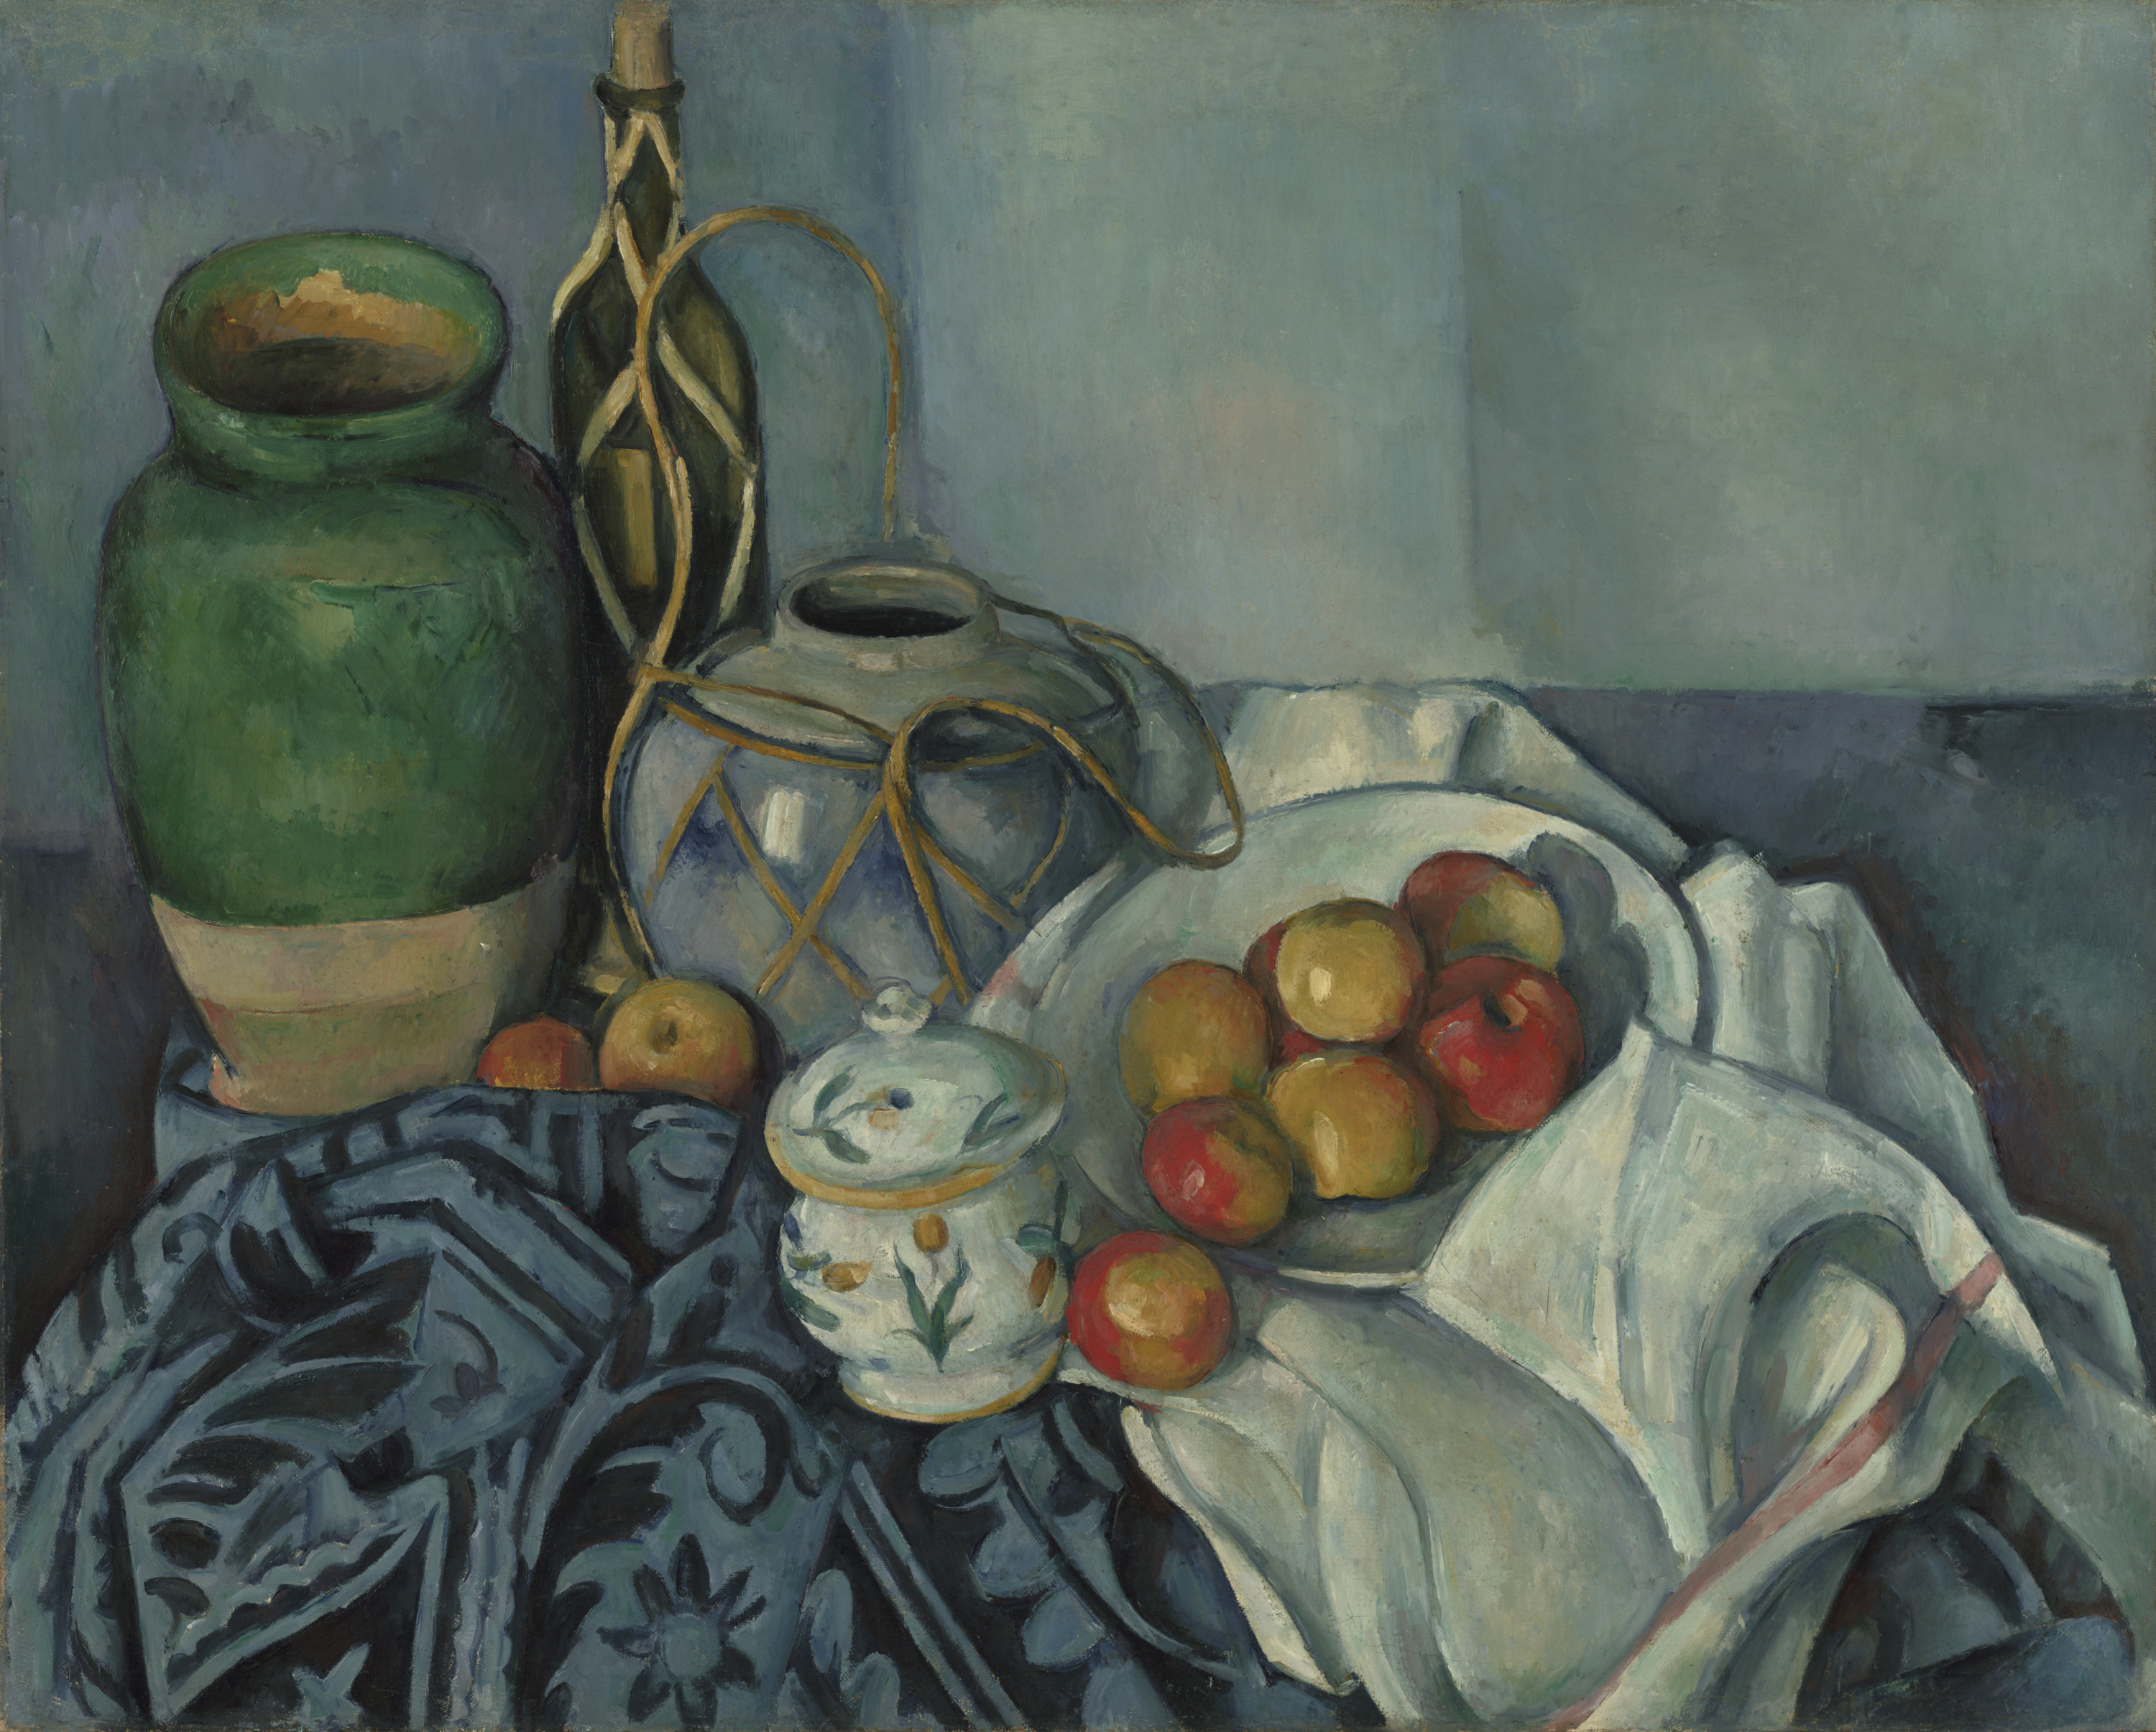 Still Life with Apples by Paul Cézanne - 1893–1894 - 65.4 × 81.6 cm J. Paul Getty Museum